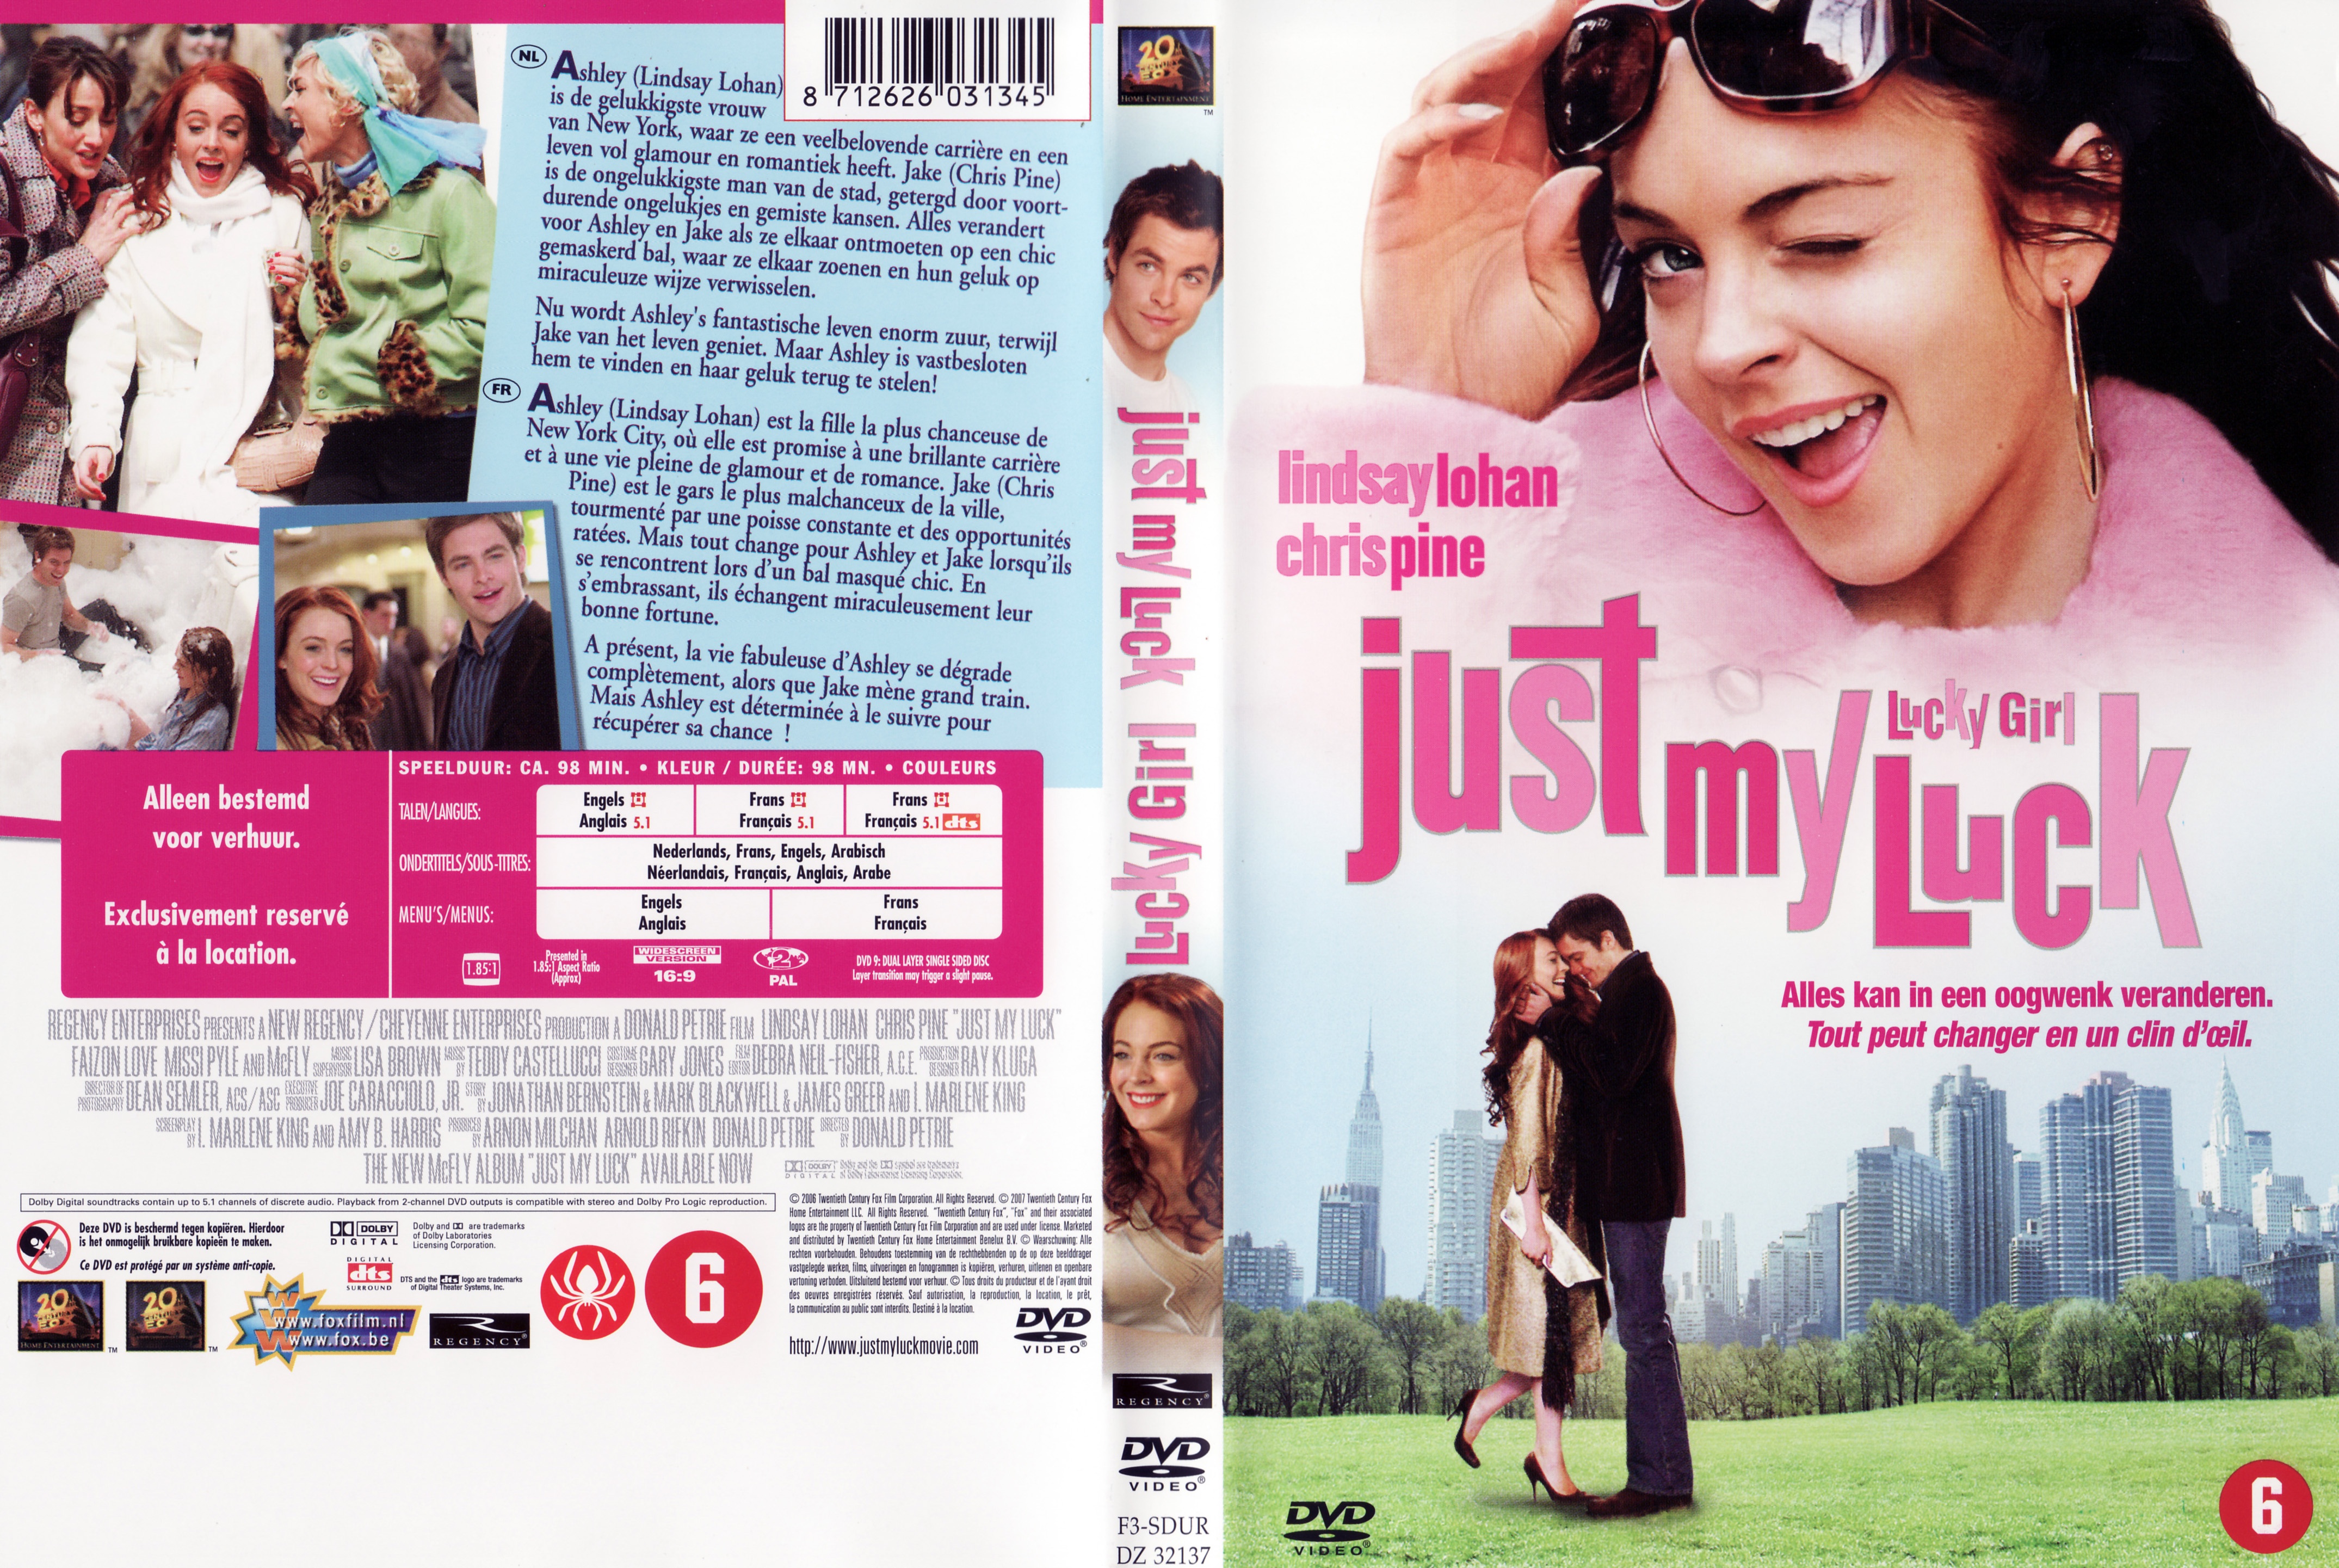 Jaquette DVD Just my luck